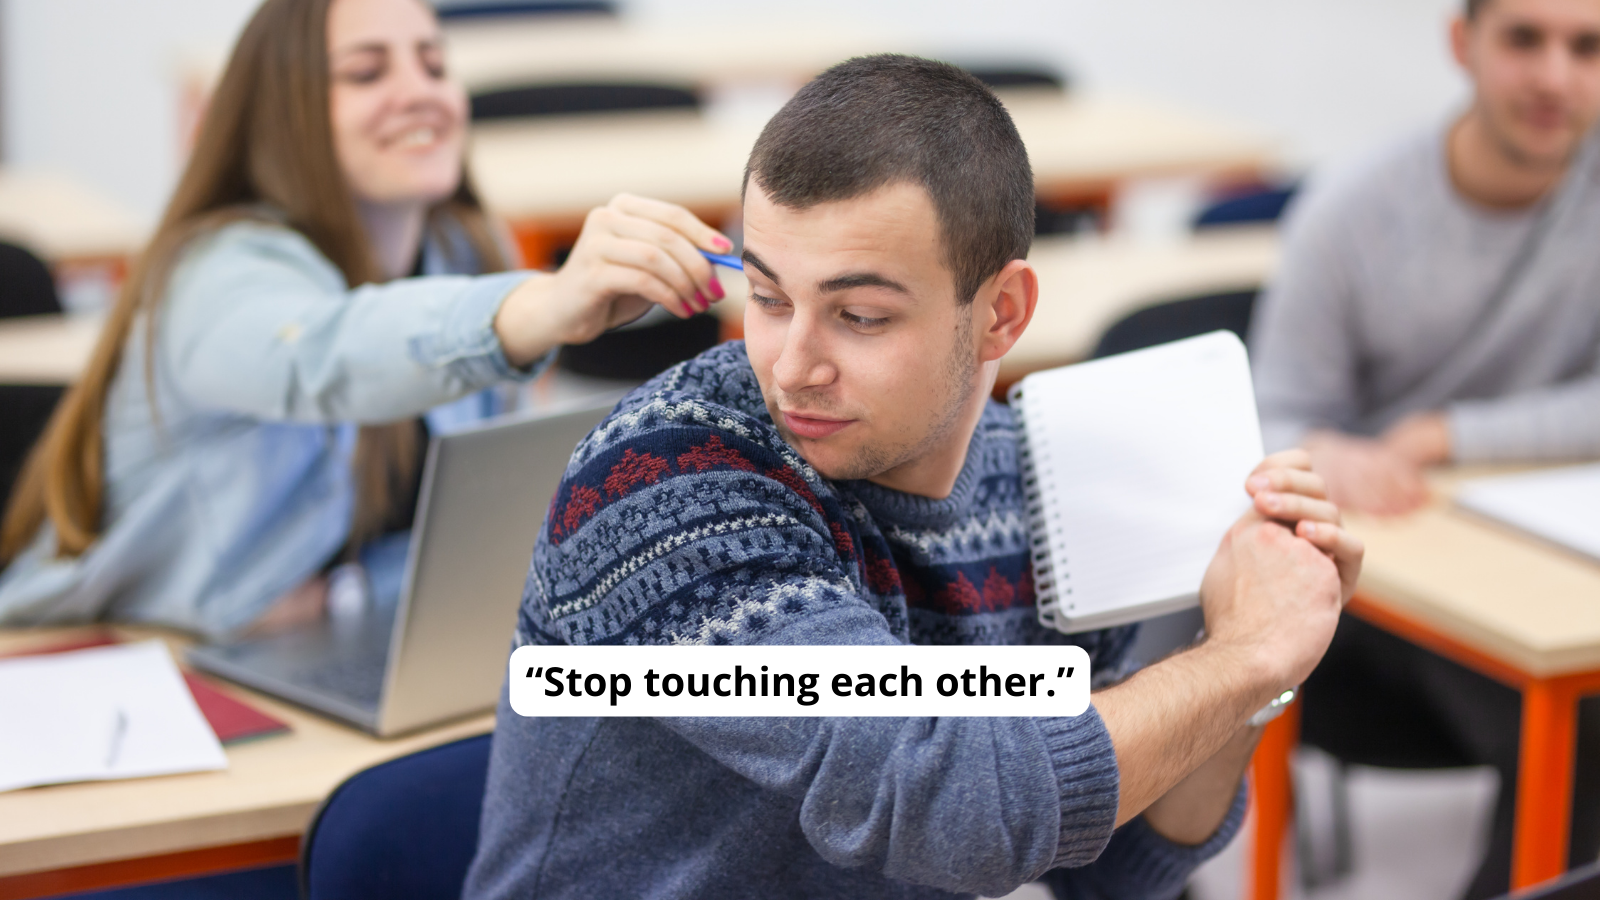 Photo example of common teacher sayings with student touching another student